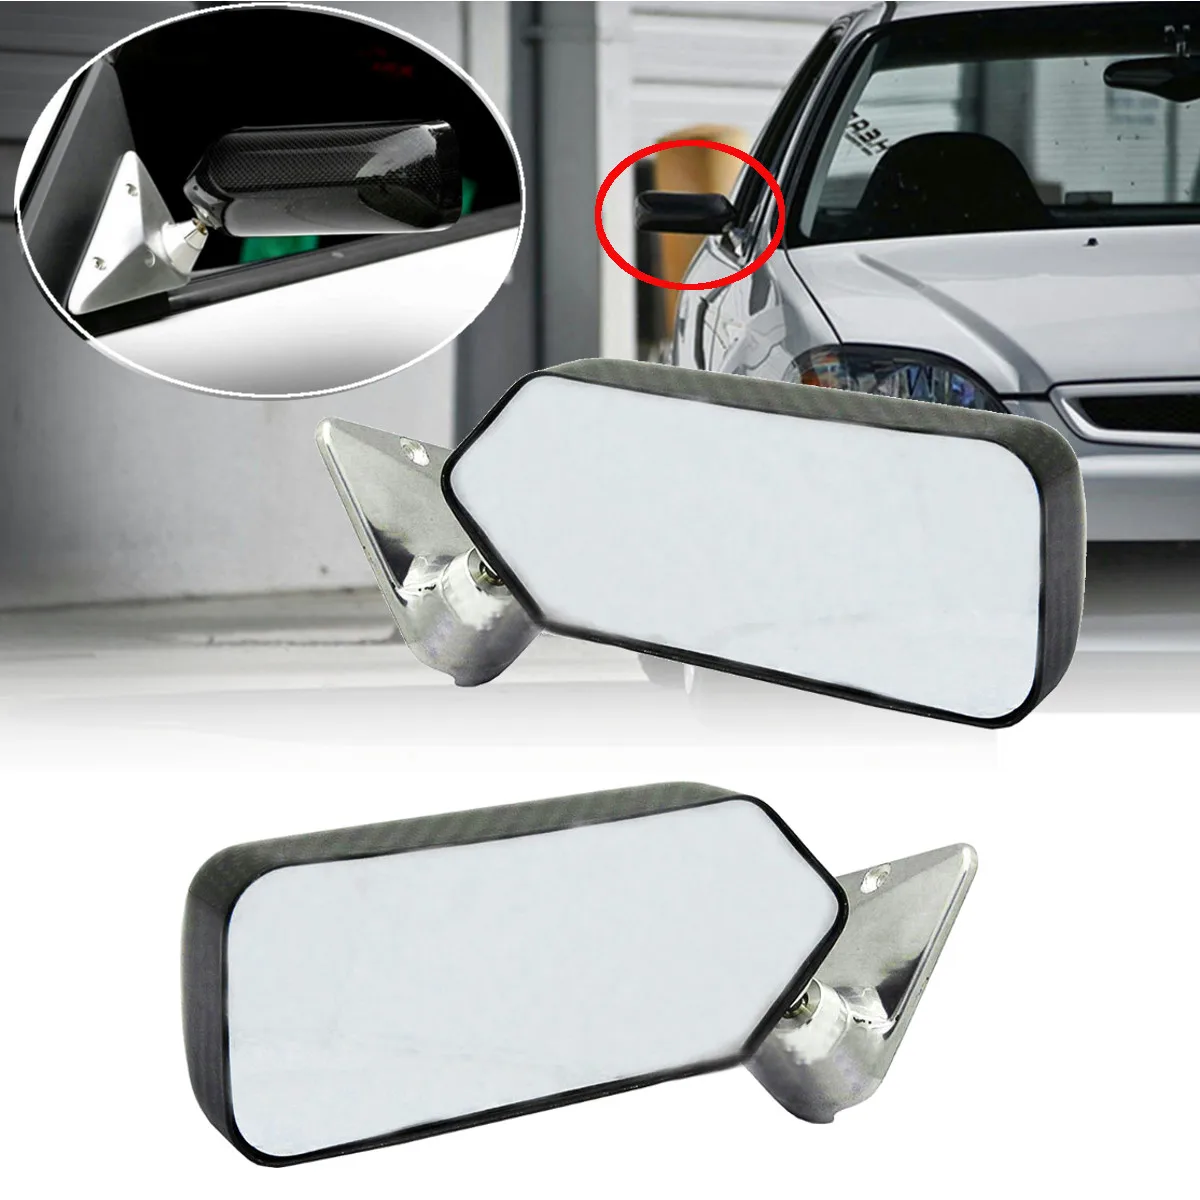 

Hot 2Pcs Carbon Fiber Look Silver/Blue Universal Car Side Mirror Rearview mirror cover Auto Rear View Side Mirror Cover For most